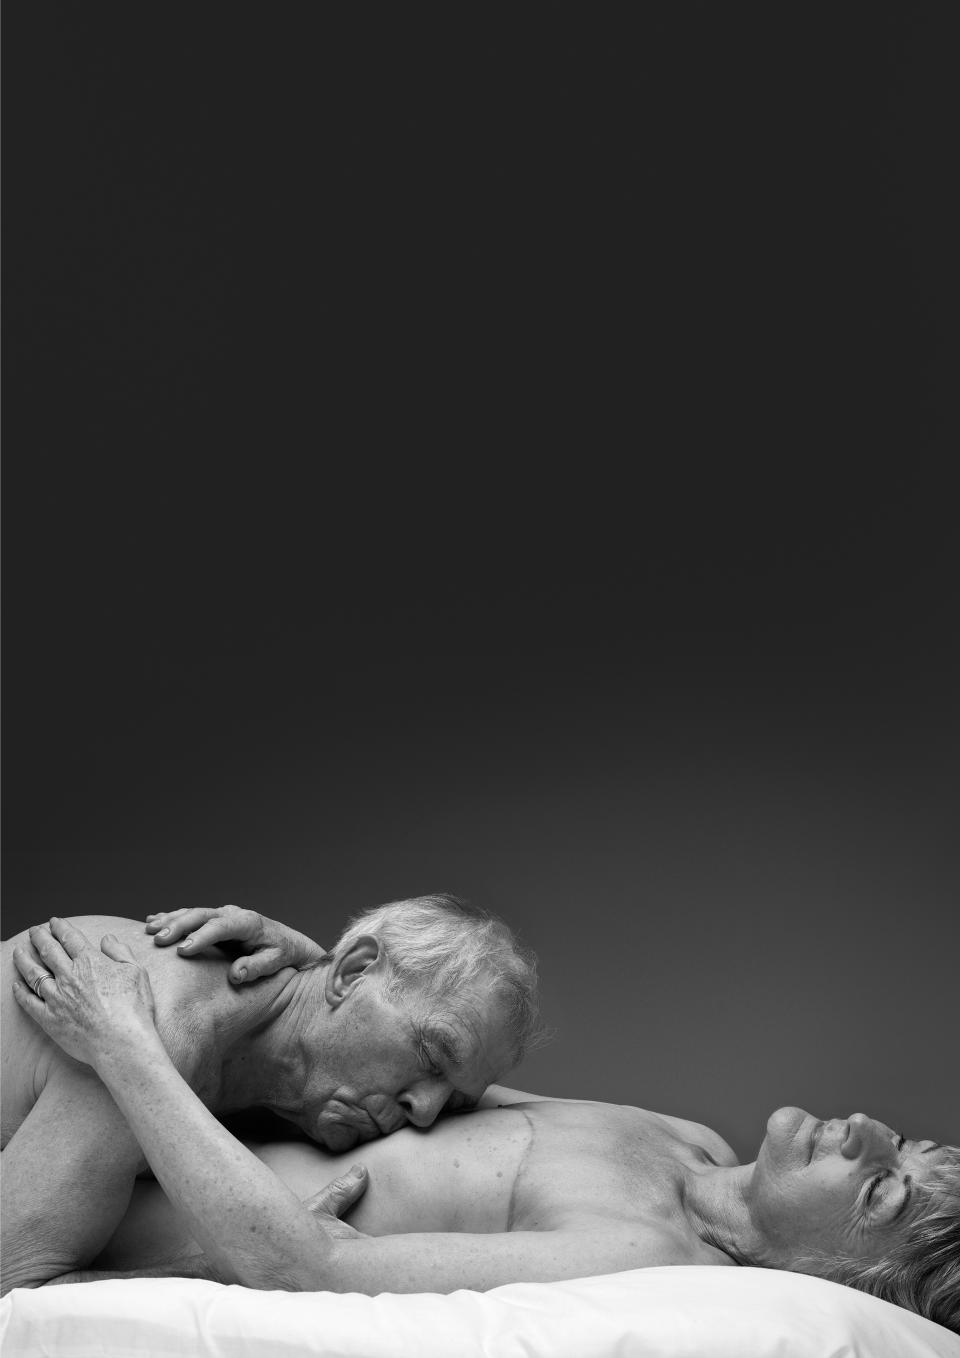 The campaign features various stories of intimacy between people in their senior years. (Rankin/Relate)